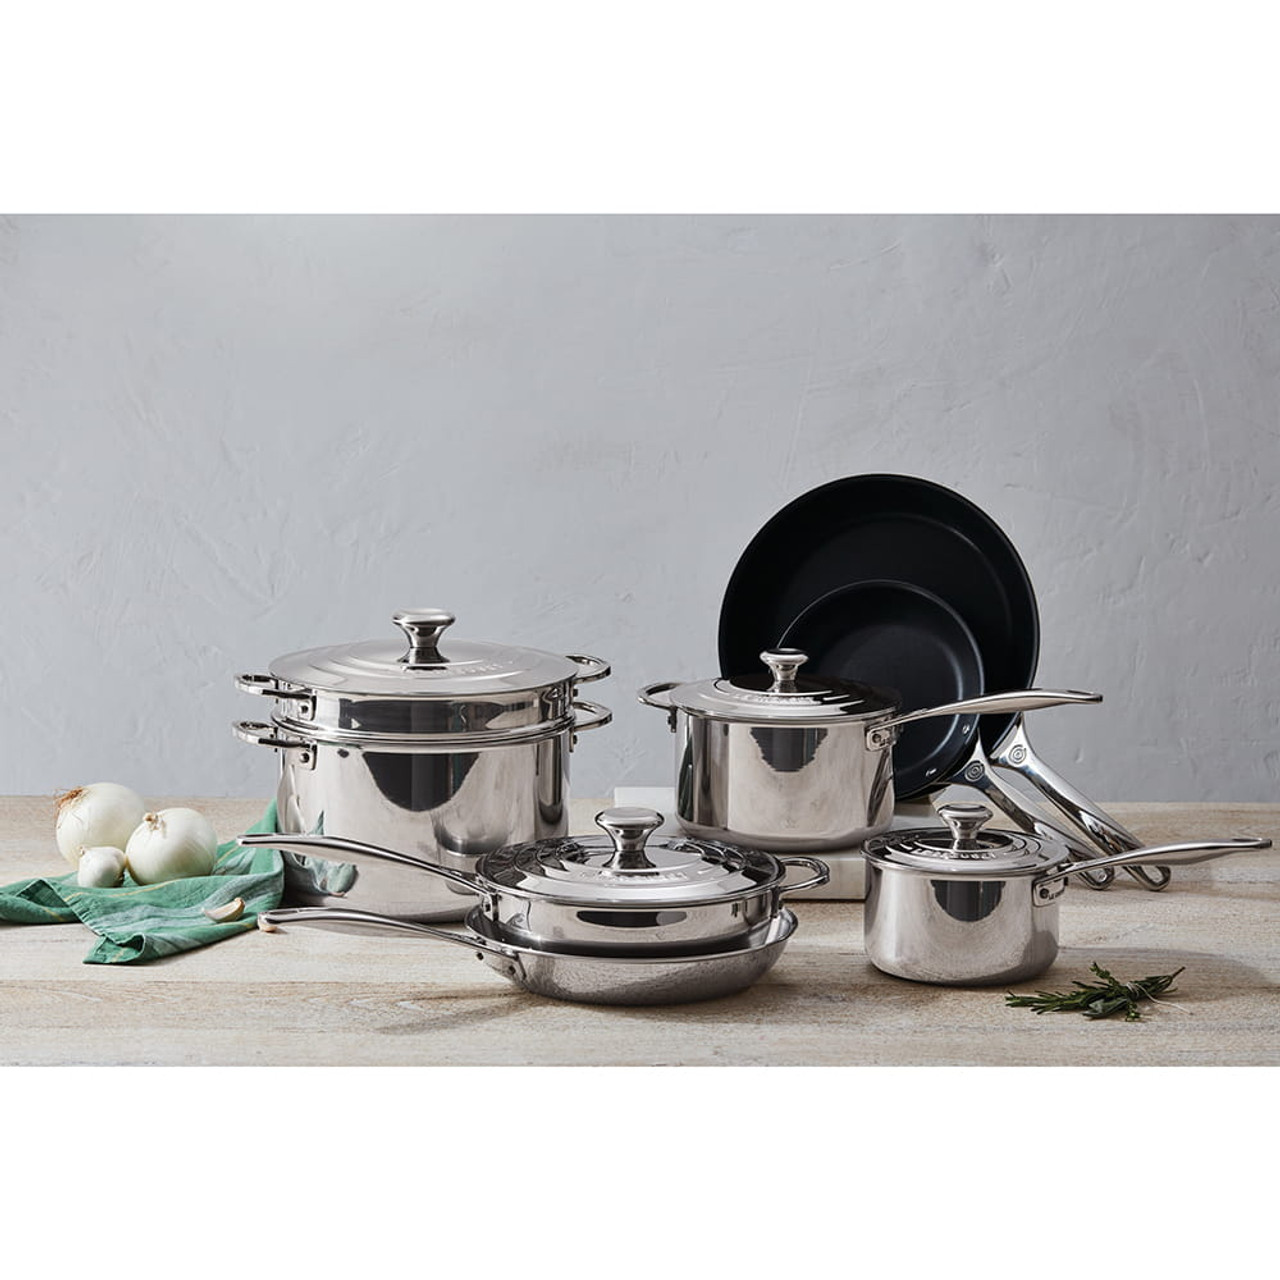 https://cdn11.bigcommerce.com/s-hccytny0od/images/stencil/1280x1280/products/3925/14285/le-creuset-12pc-stainless-steel-set-1__93288.1612874576.jpg?c=2?imbypass=on